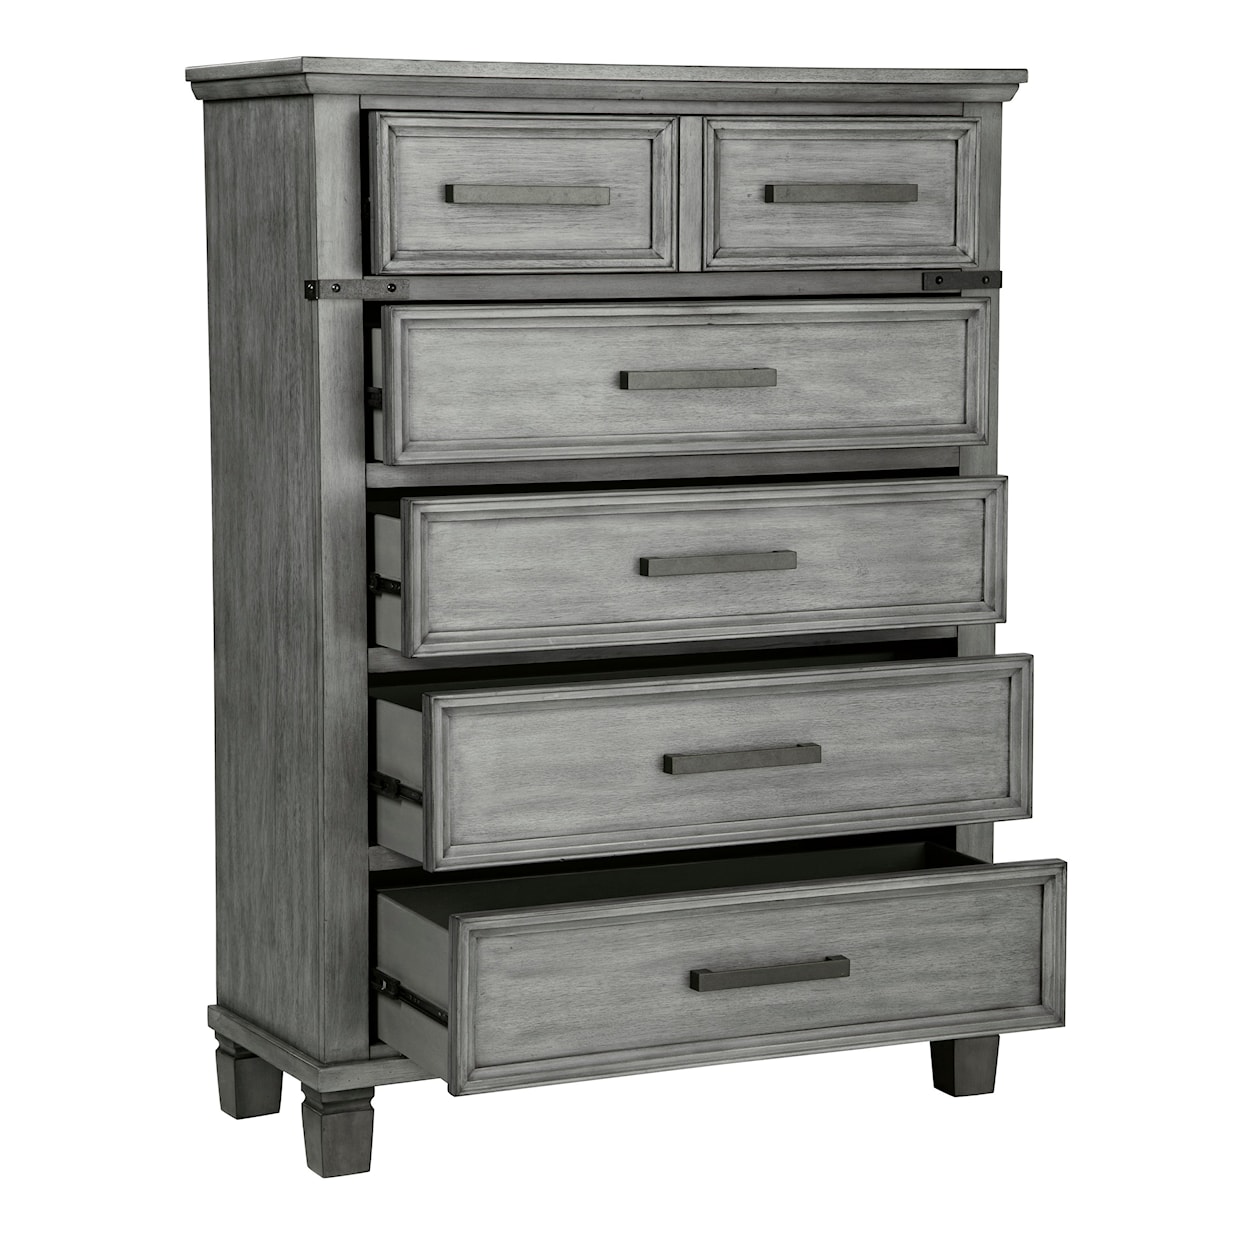 Benchcraft Russelyn Chest of Drawers